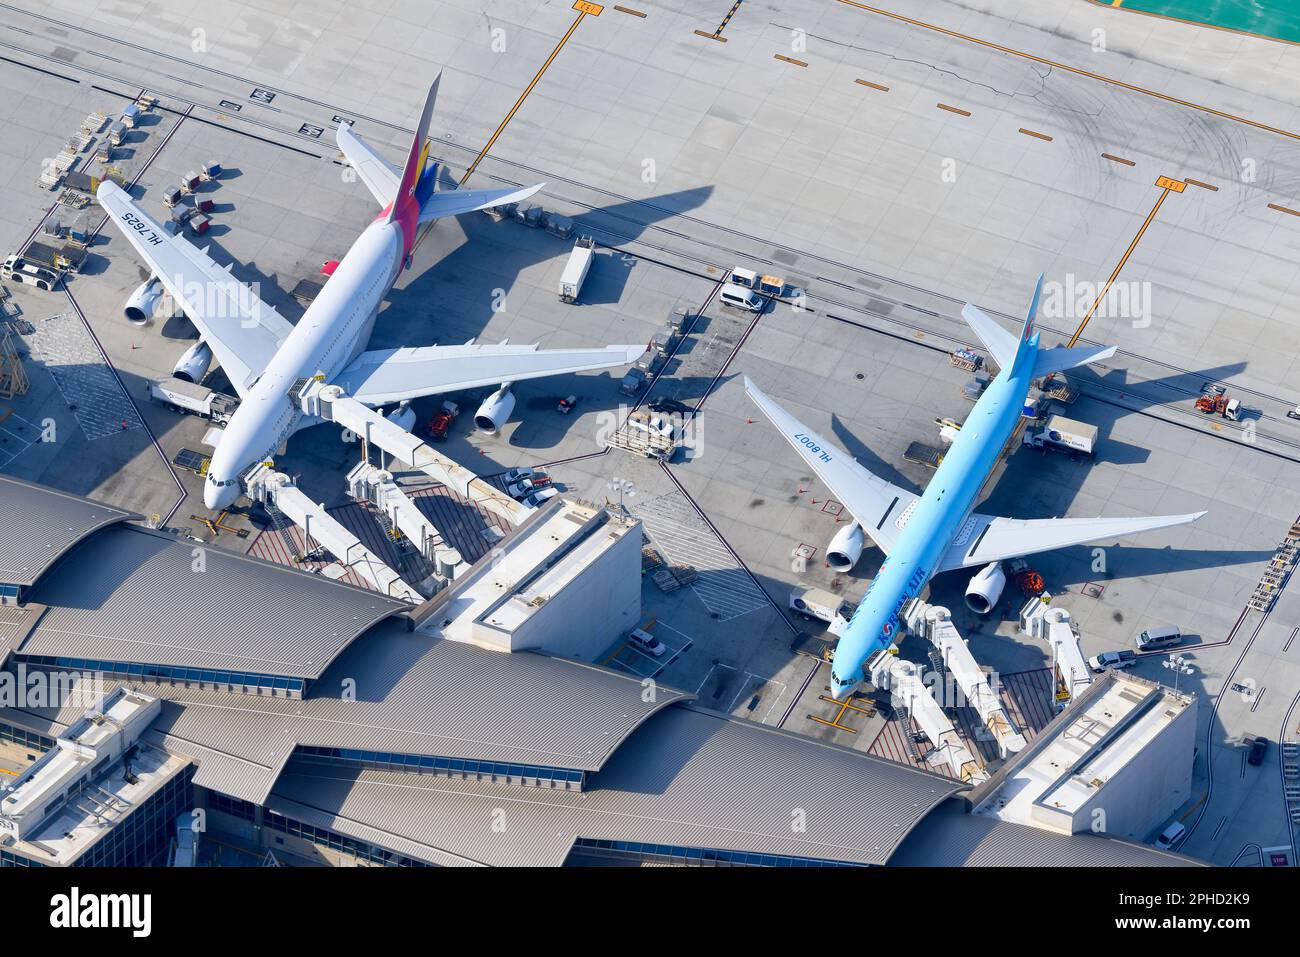 Asiana Airlines Airbus A380 and Korean Air Boeing 777 aircraft side by side. Airlines from South Korea bound to merger. Asiana and Korean Air planes. Stock Photo